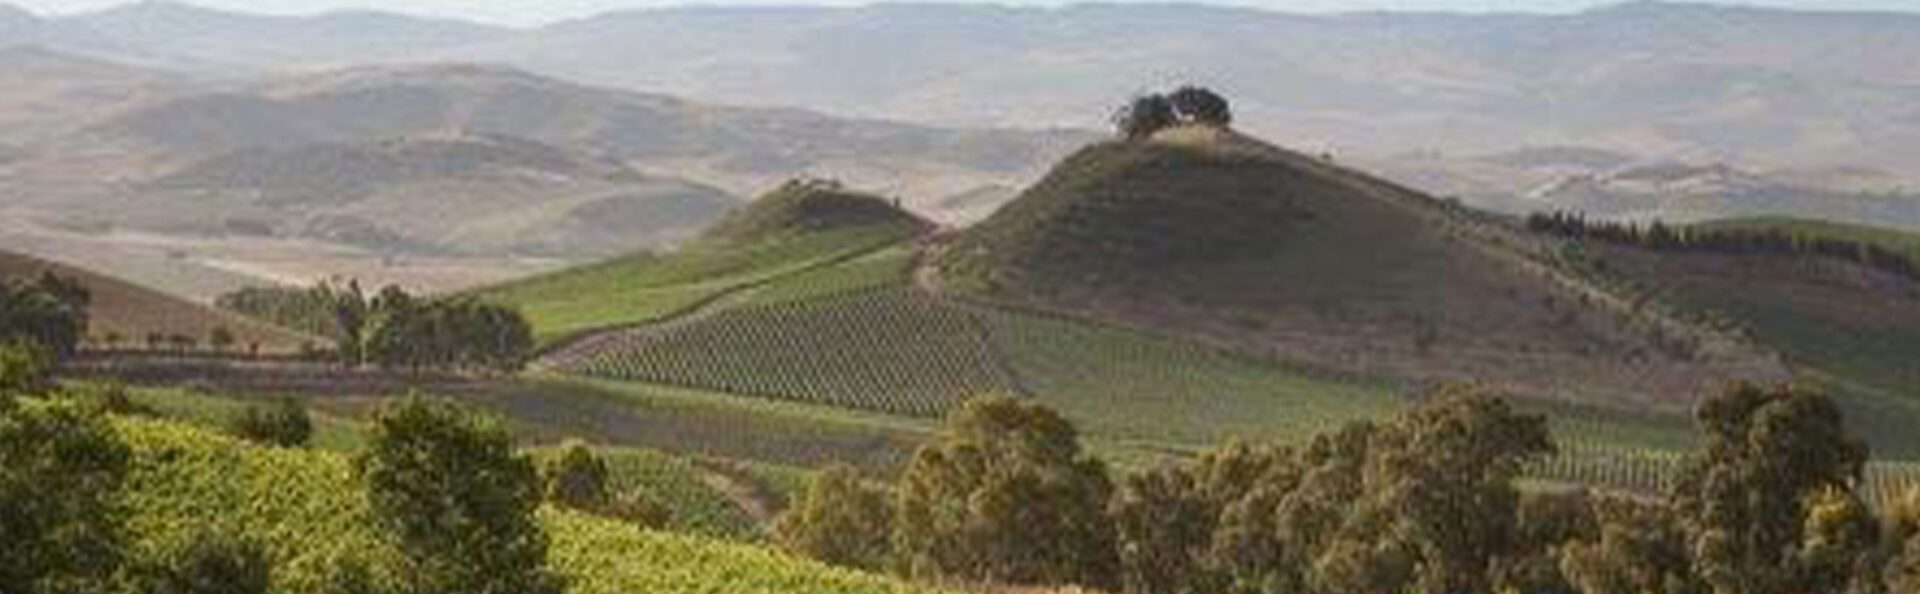 A view of some hills with many different types of vines.